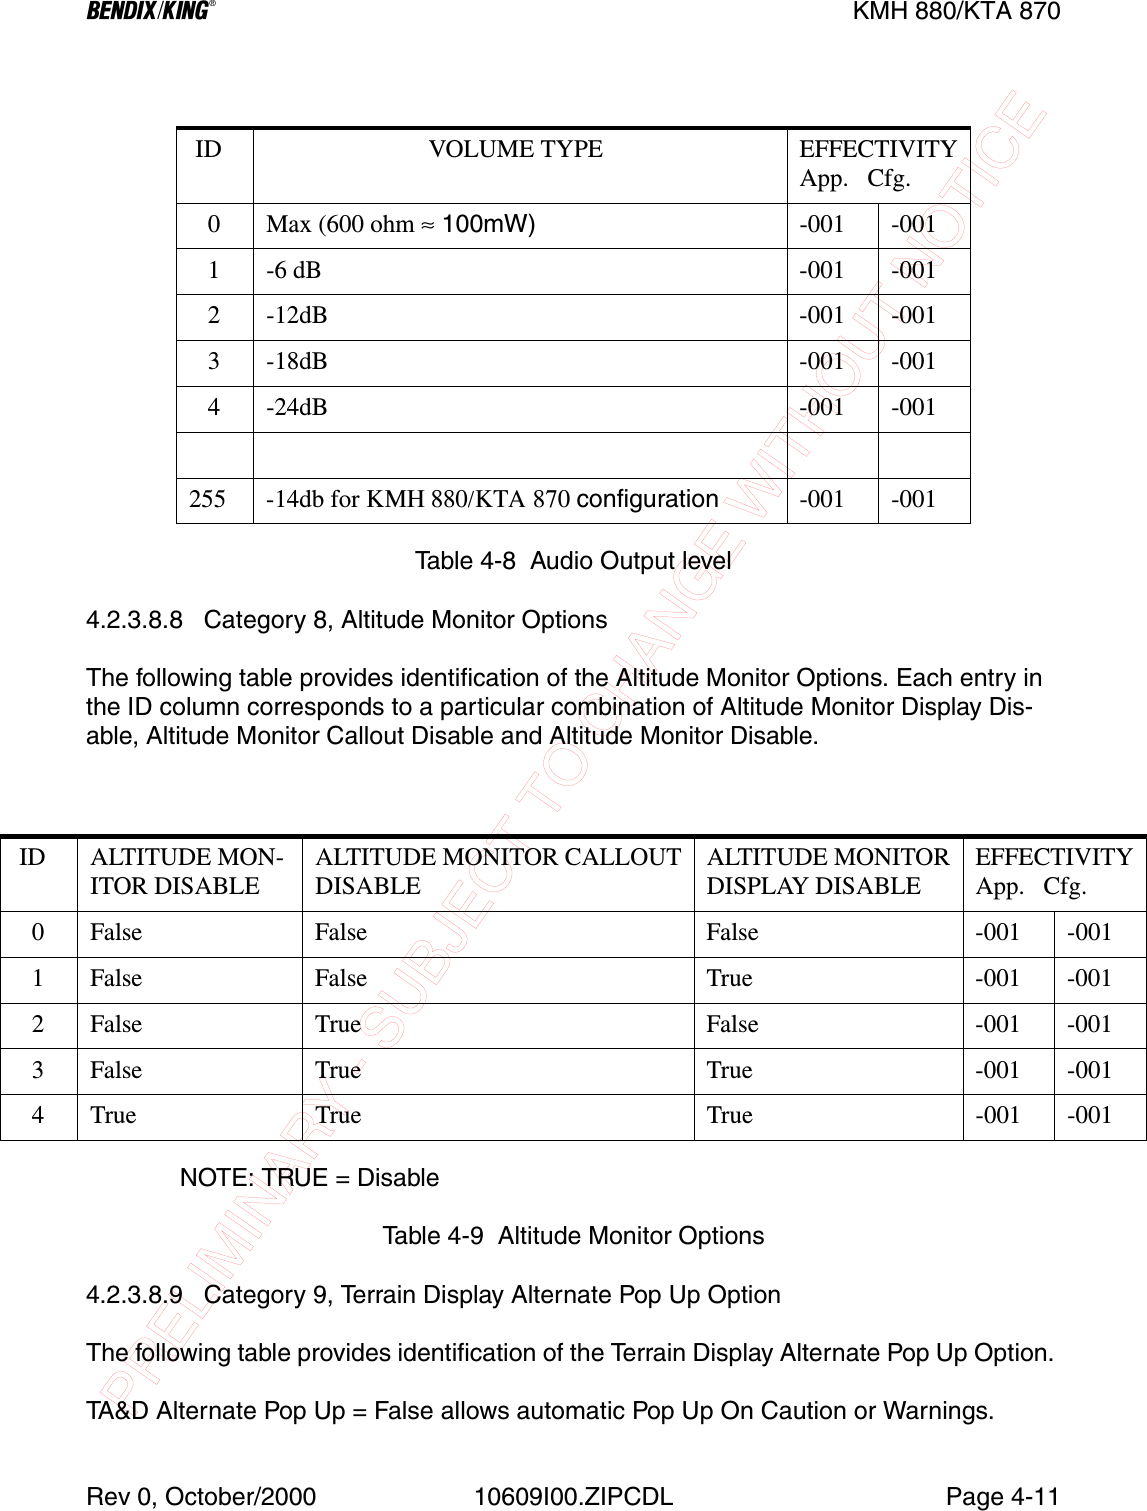 PRELIMINARY - SUBJECT TO CHANGE WITHOUT NOTICEBKMH 880/KTA 870Rev 0, October/2000 10609I00.ZIPCDL Page 4-11Table 4-8  Audio Output level4.2.3.8.8   Category 8, Altitude Monitor OptionsThe following table provides identification of the Altitude Monitor Options. Each entry in the ID column corresponds to a particular combination of Altitude Monitor Display Dis-able, Altitude Monitor Callout Disable and Altitude Monitor Disable.NOTE: TRUE = DisableTable 4-9  Altitude Monitor Options4.2.3.8.9   Category 9, Terrain Display Alternate Pop Up OptionThe following table provides identification of the Terrain Display Alternate Pop Up Option. TA&amp;D Alternate Pop Up = False allows automatic Pop Up On Caution or Warnings.  ID                           VOLUME TYPE EFFECTIVITYApp.   Cfg.   0 Max (600 ohm ≈ 100mW) -001 -001   1 -6 dB -001 -001   2 -12dB -001 -001   3 -18dB -001 -001   4 -24dB -001 -001255 -14db for ΚΜΗ 880/ΚΤΑ 870 configuration -001 -001 ID ALTITUDE MON-ITOR DISABLEALTITUDE MONITOR CALLOUTDISABLEALTITUDE MONITORDISPLAY DISABLEEFFECTIVITYApp.   Cfg.   0 False False False -001 -001   1 False False True -001 -001   2 False True False -001 -001   3 False True True -001 -001   4 True True True -001 -001